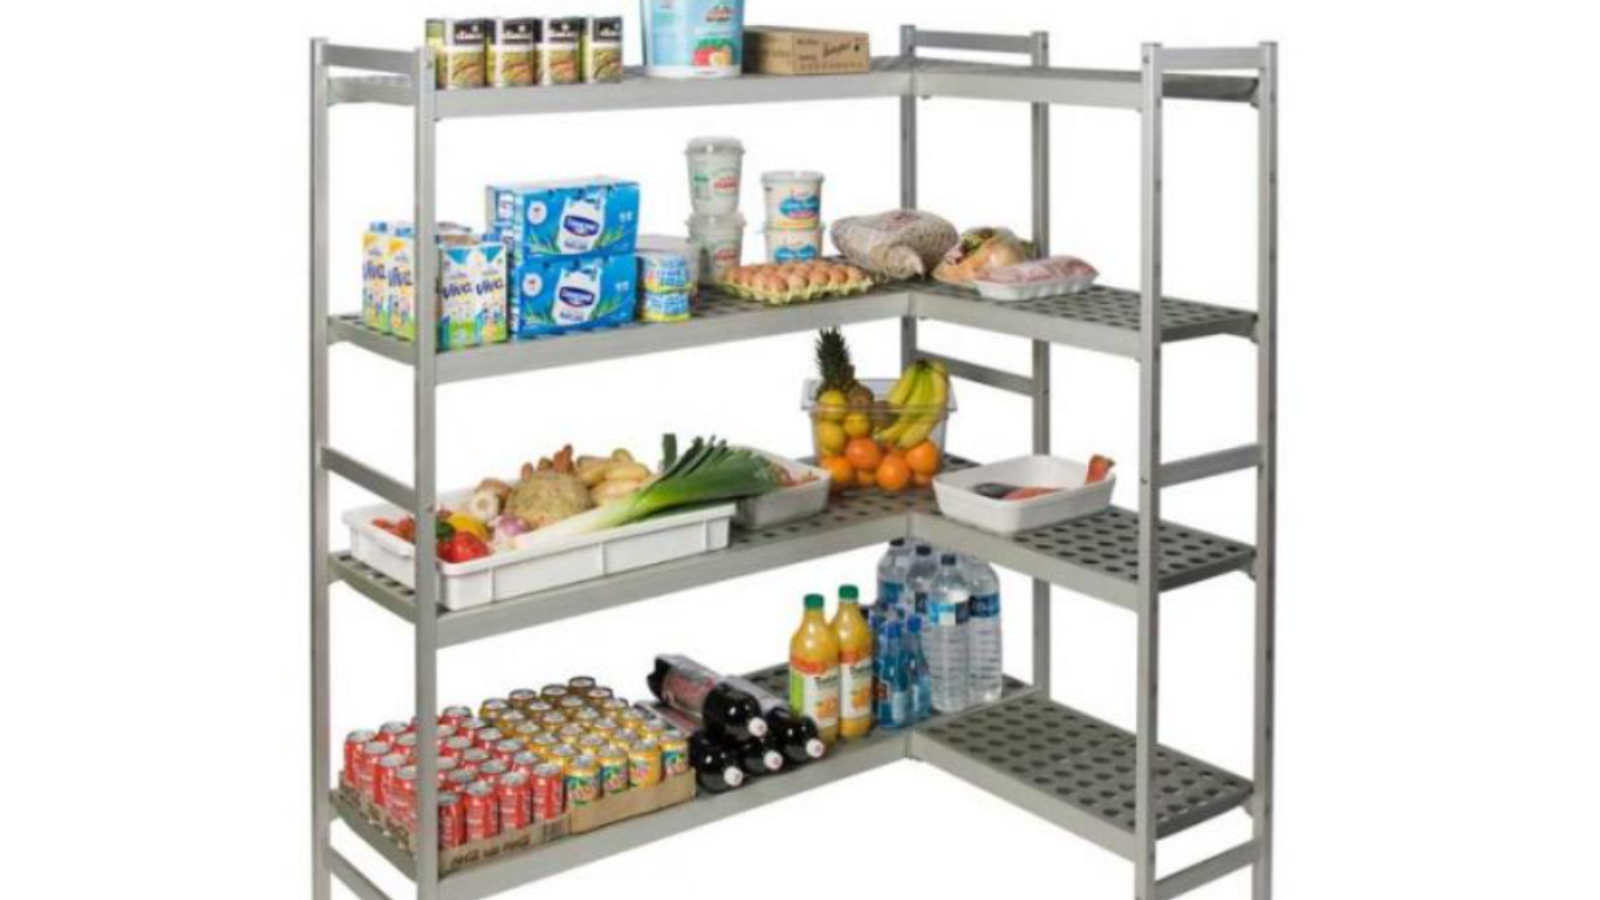 A stainless-steel shelving unit. The unit is shaped like the letter L. It has four shelves and stands tall. Each stainless steel shelf contains food and beverage inventory.